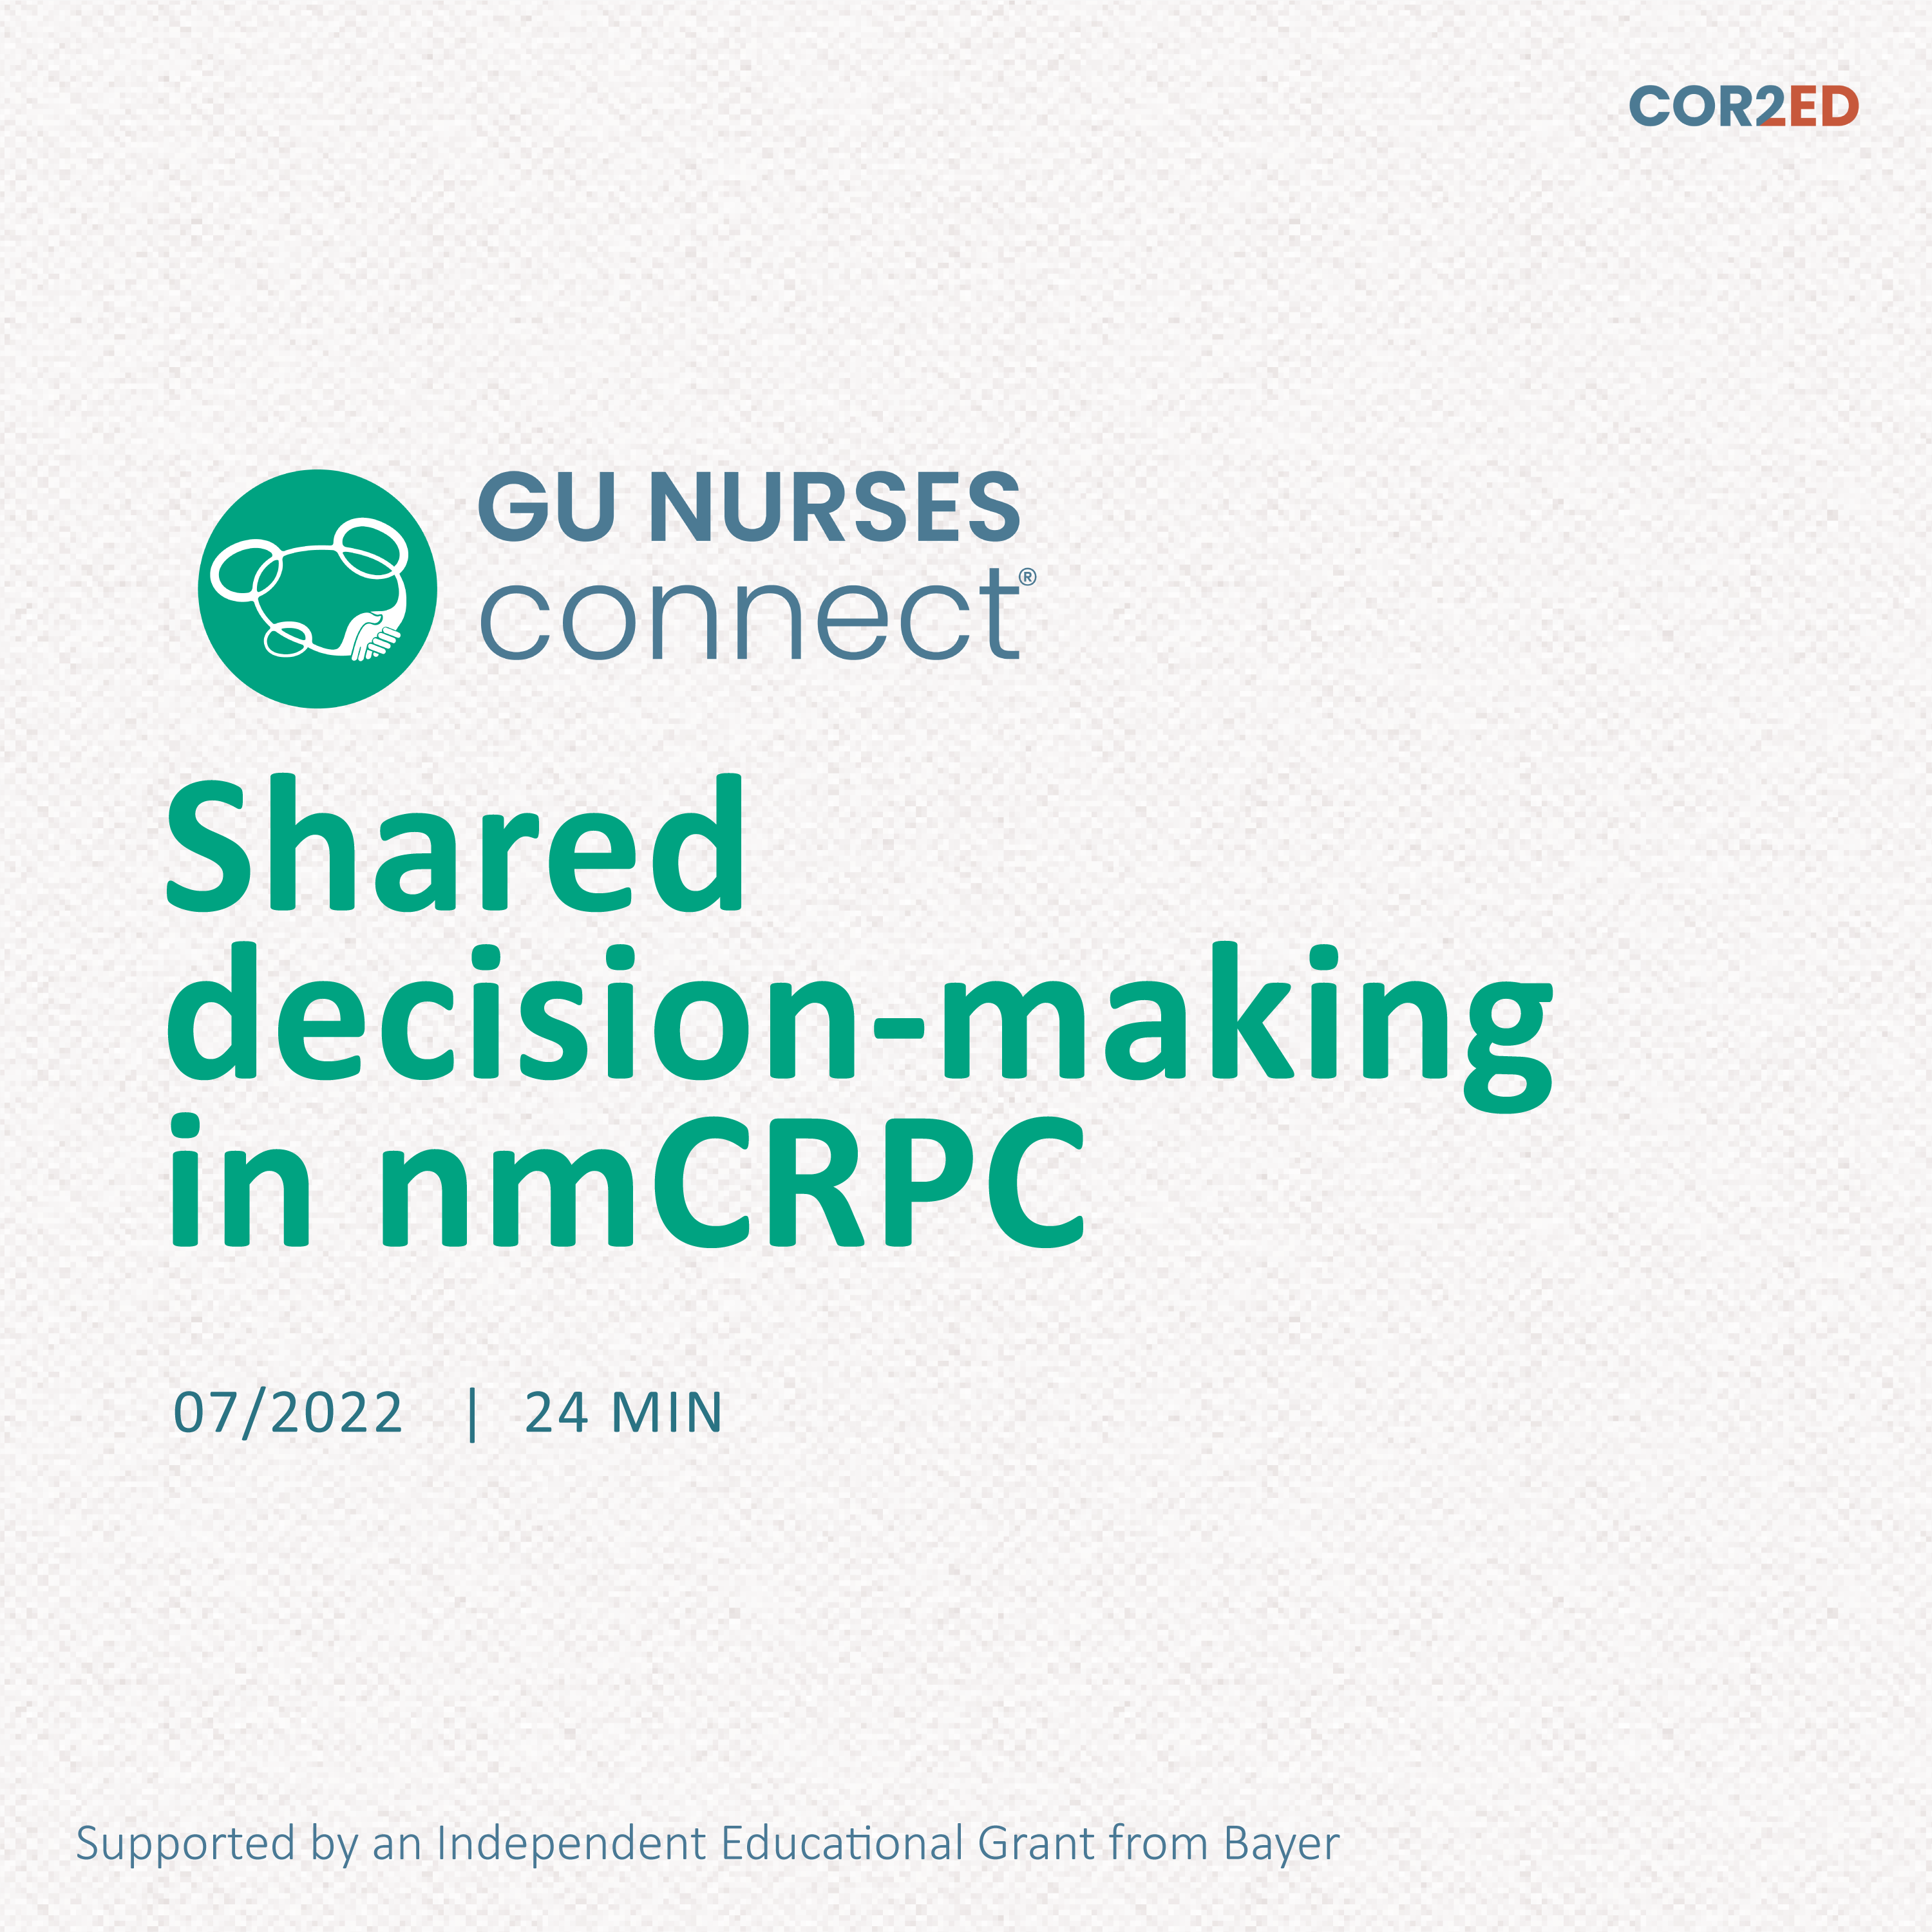 Shared decision-making in nmCRPC